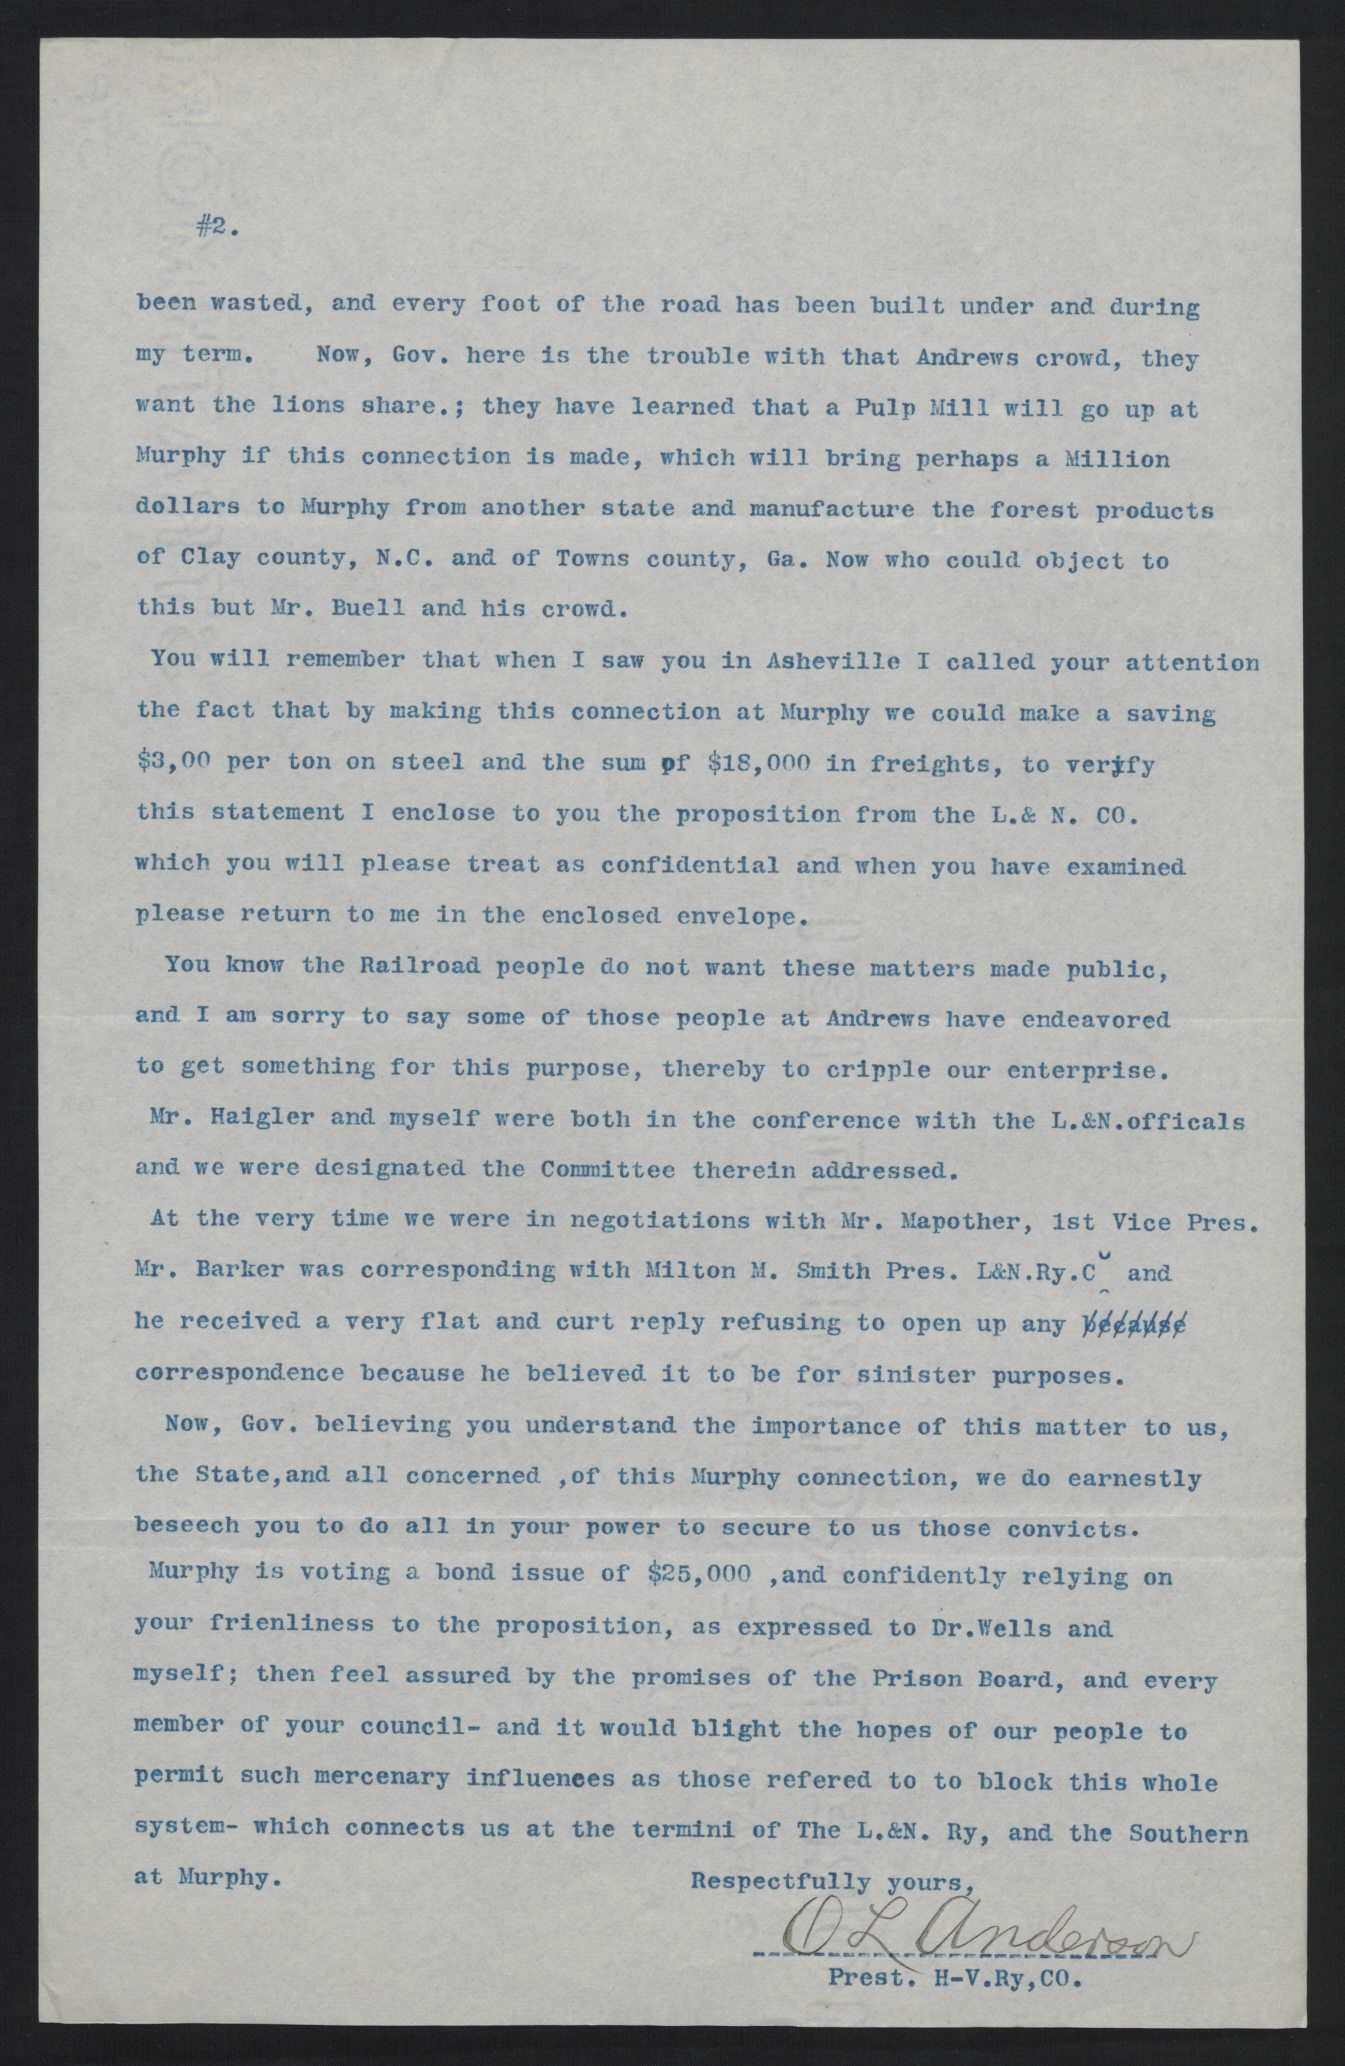 Letter from Anderson to Craig, June 23, 1915, page 2